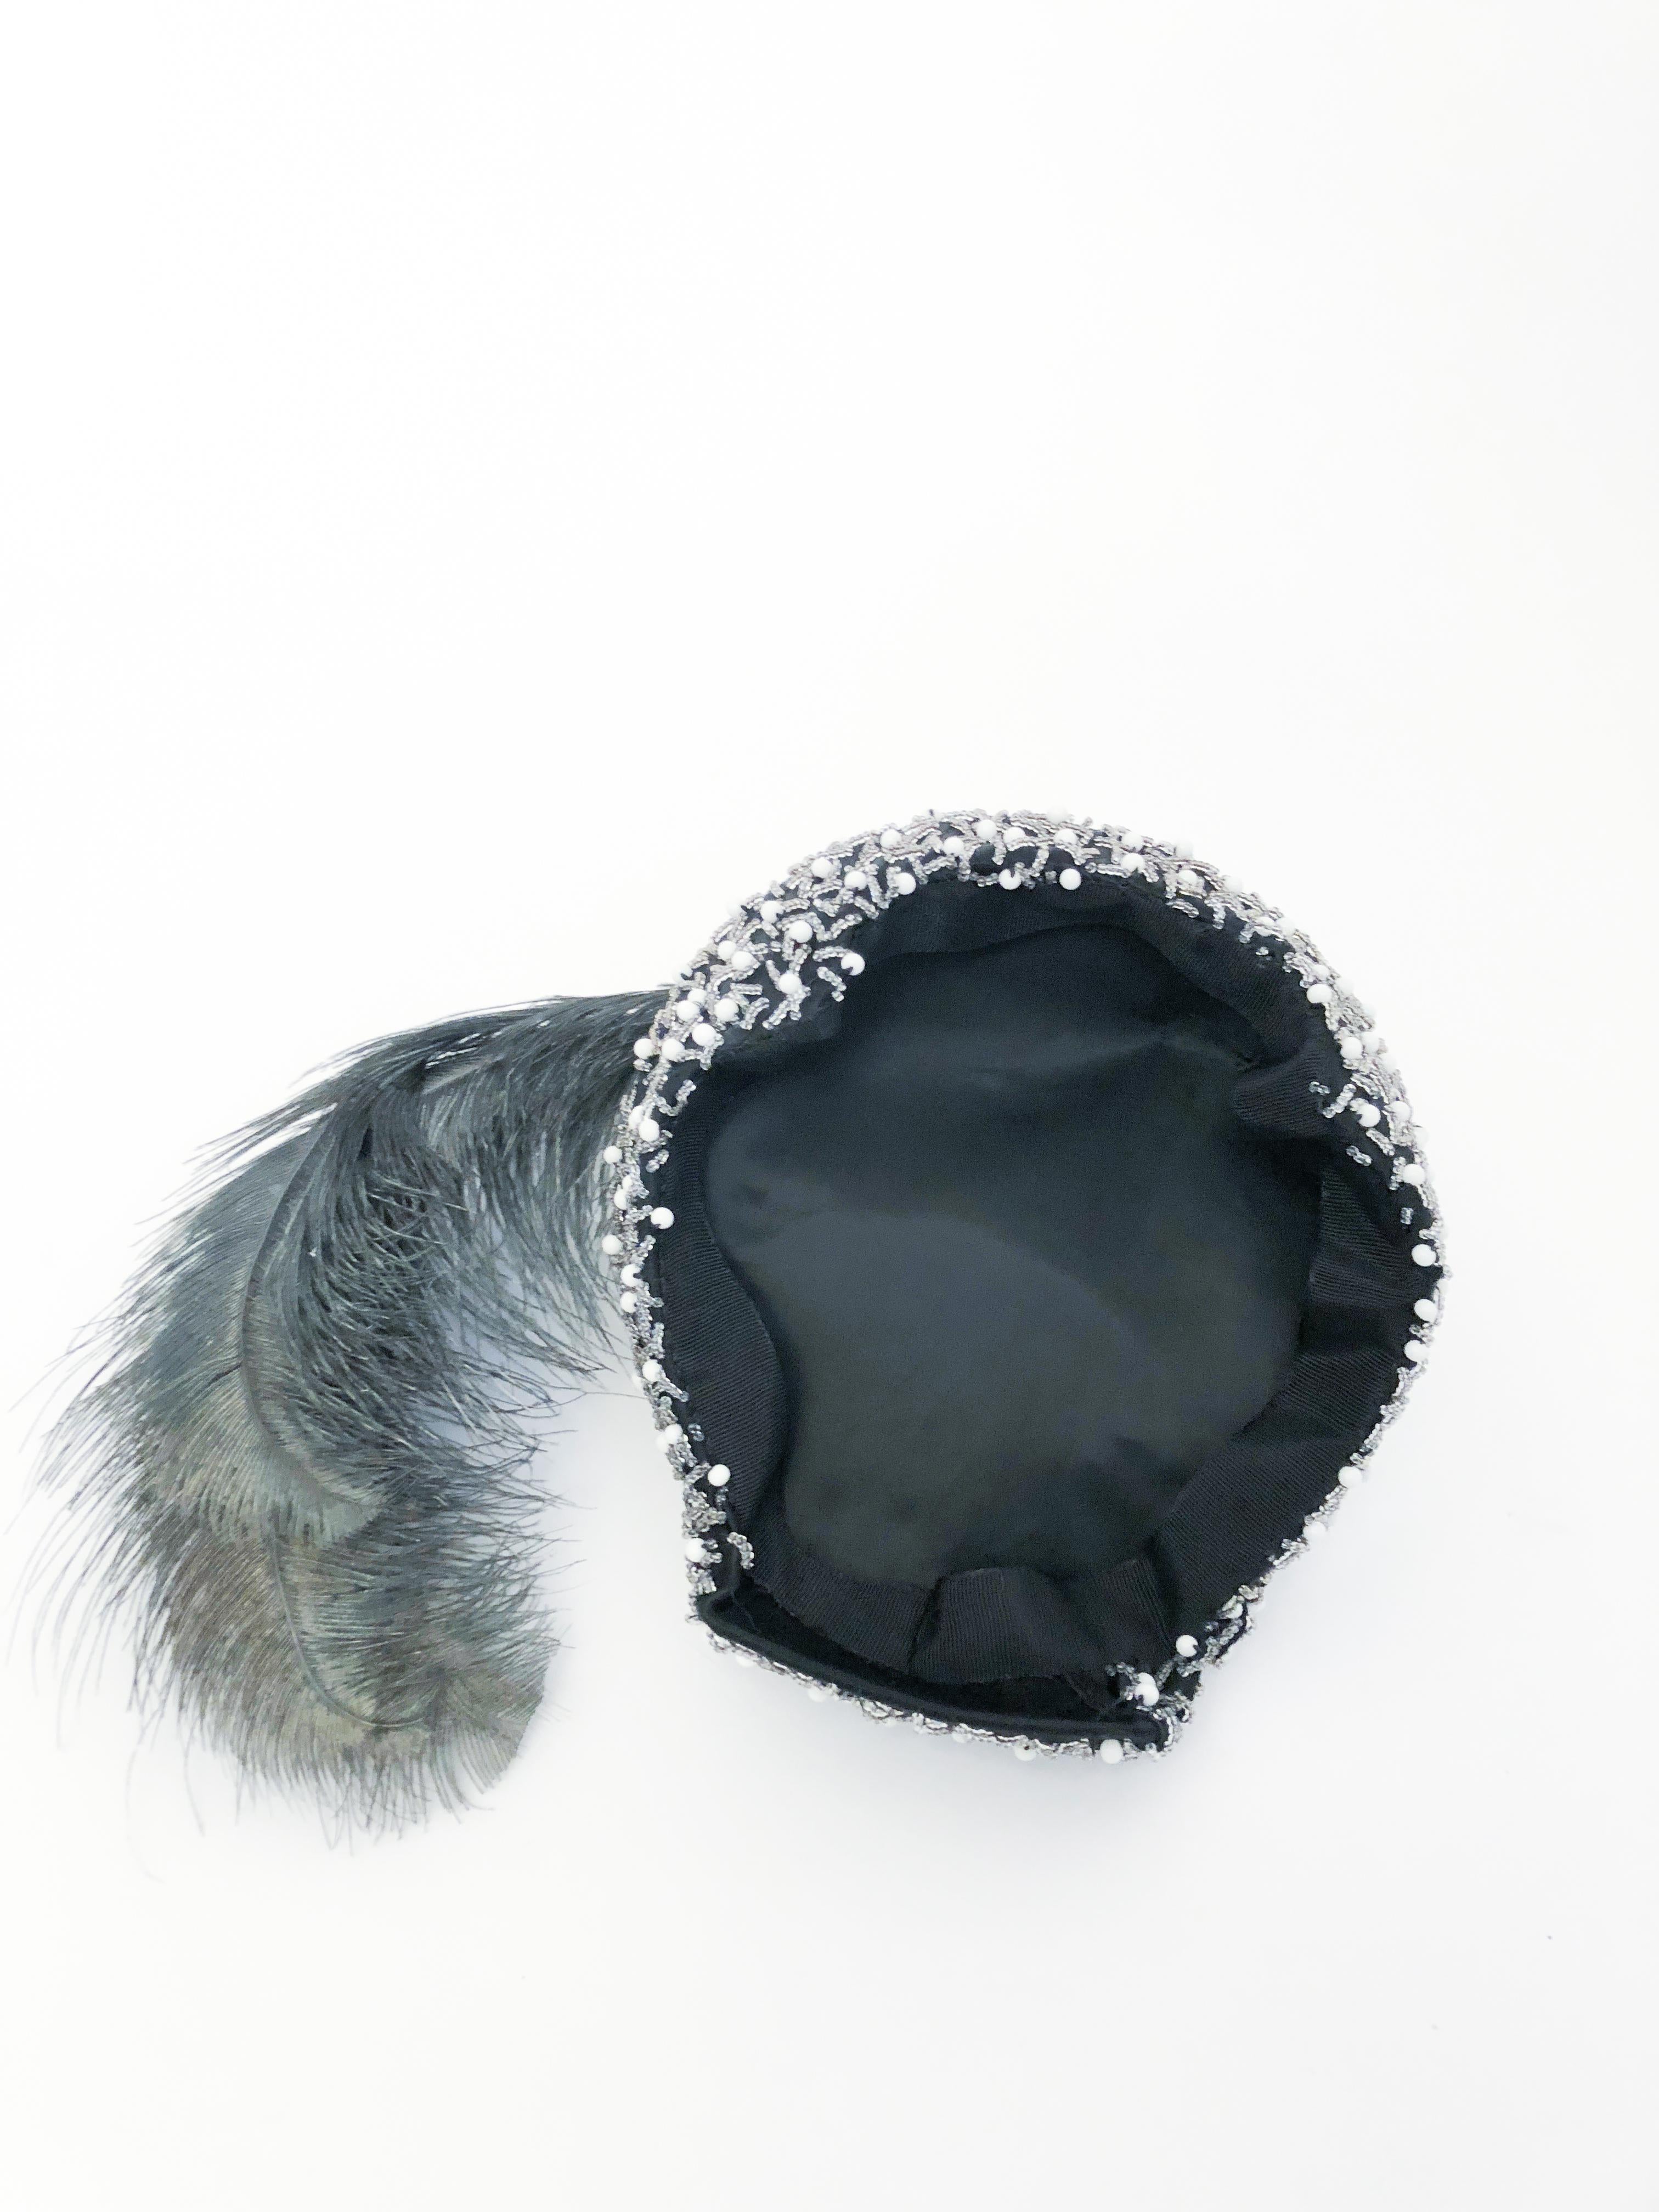 1950s Black Cocktail Hat with Hand-Beading and Grey Feather For Sale 1